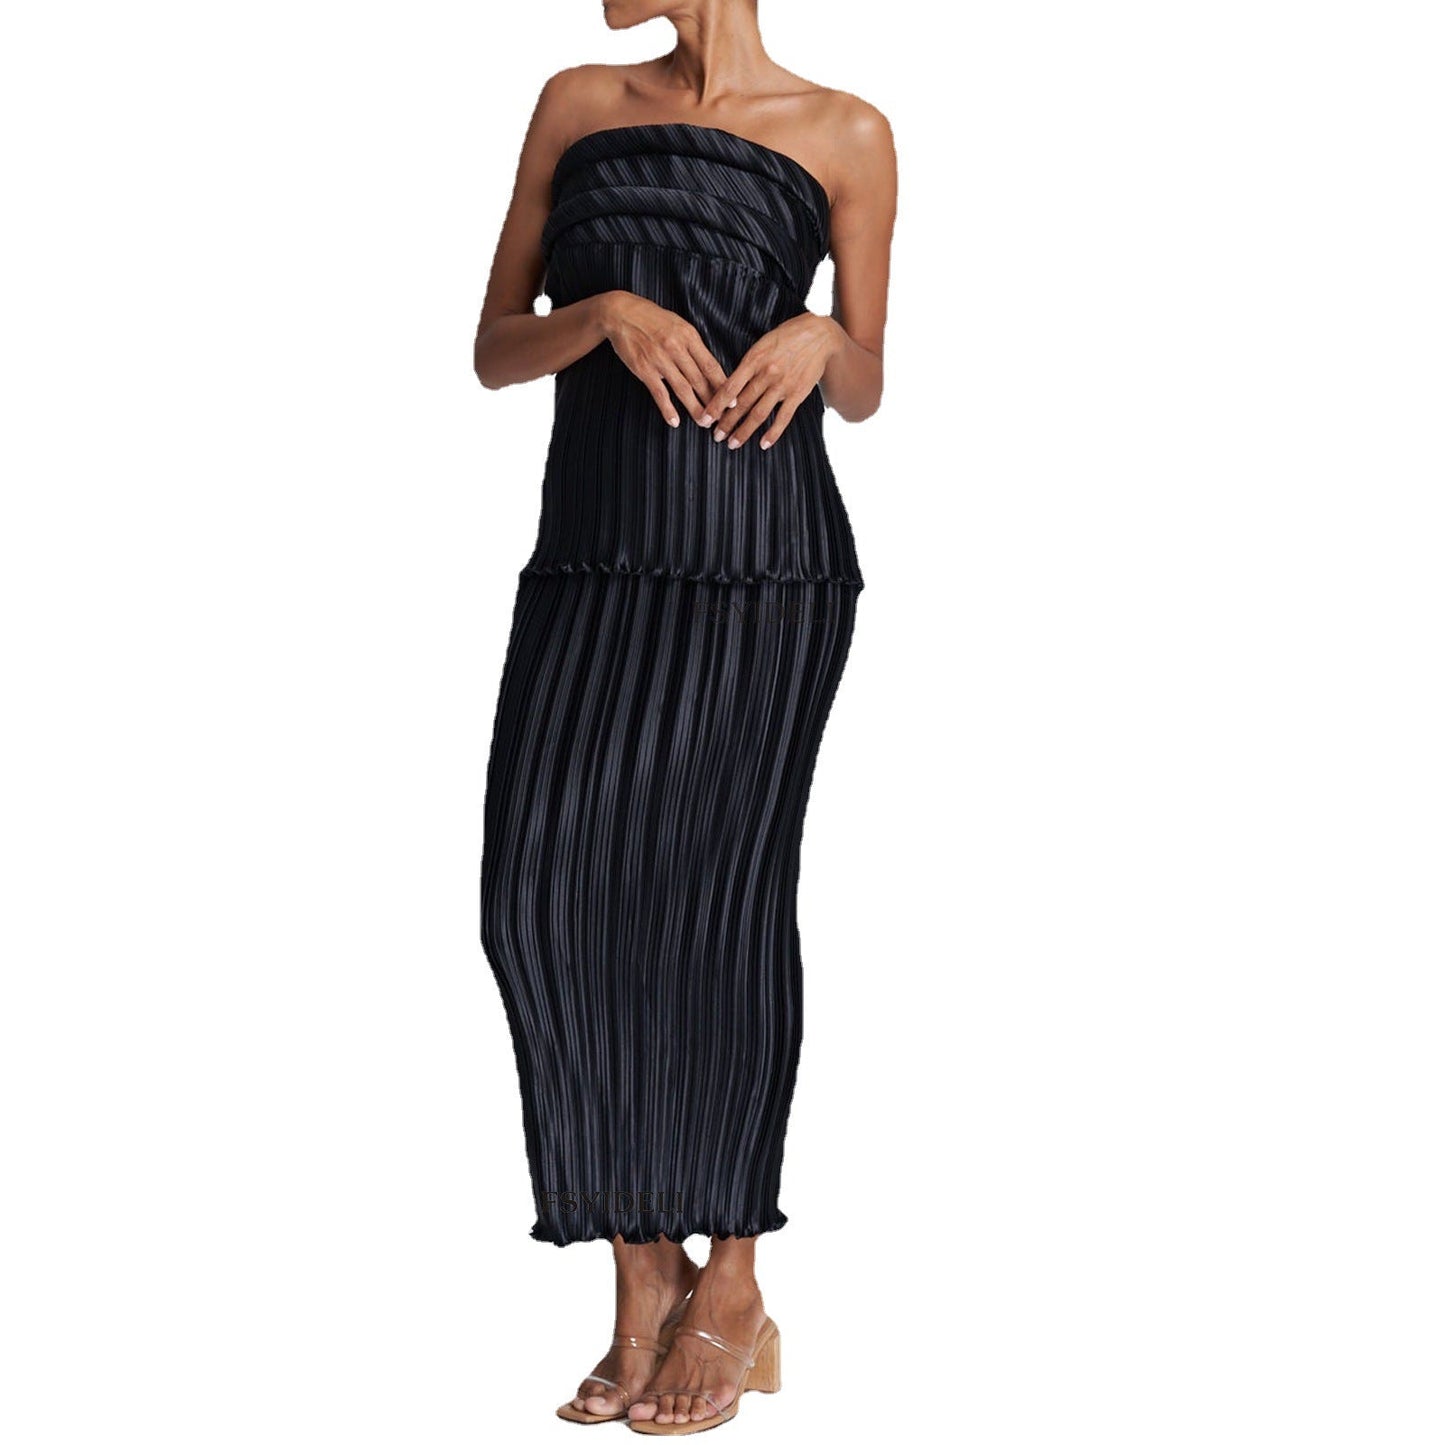 Summer Solid Color Suit Women Sexy Tube Top Top Skirt Two Piece